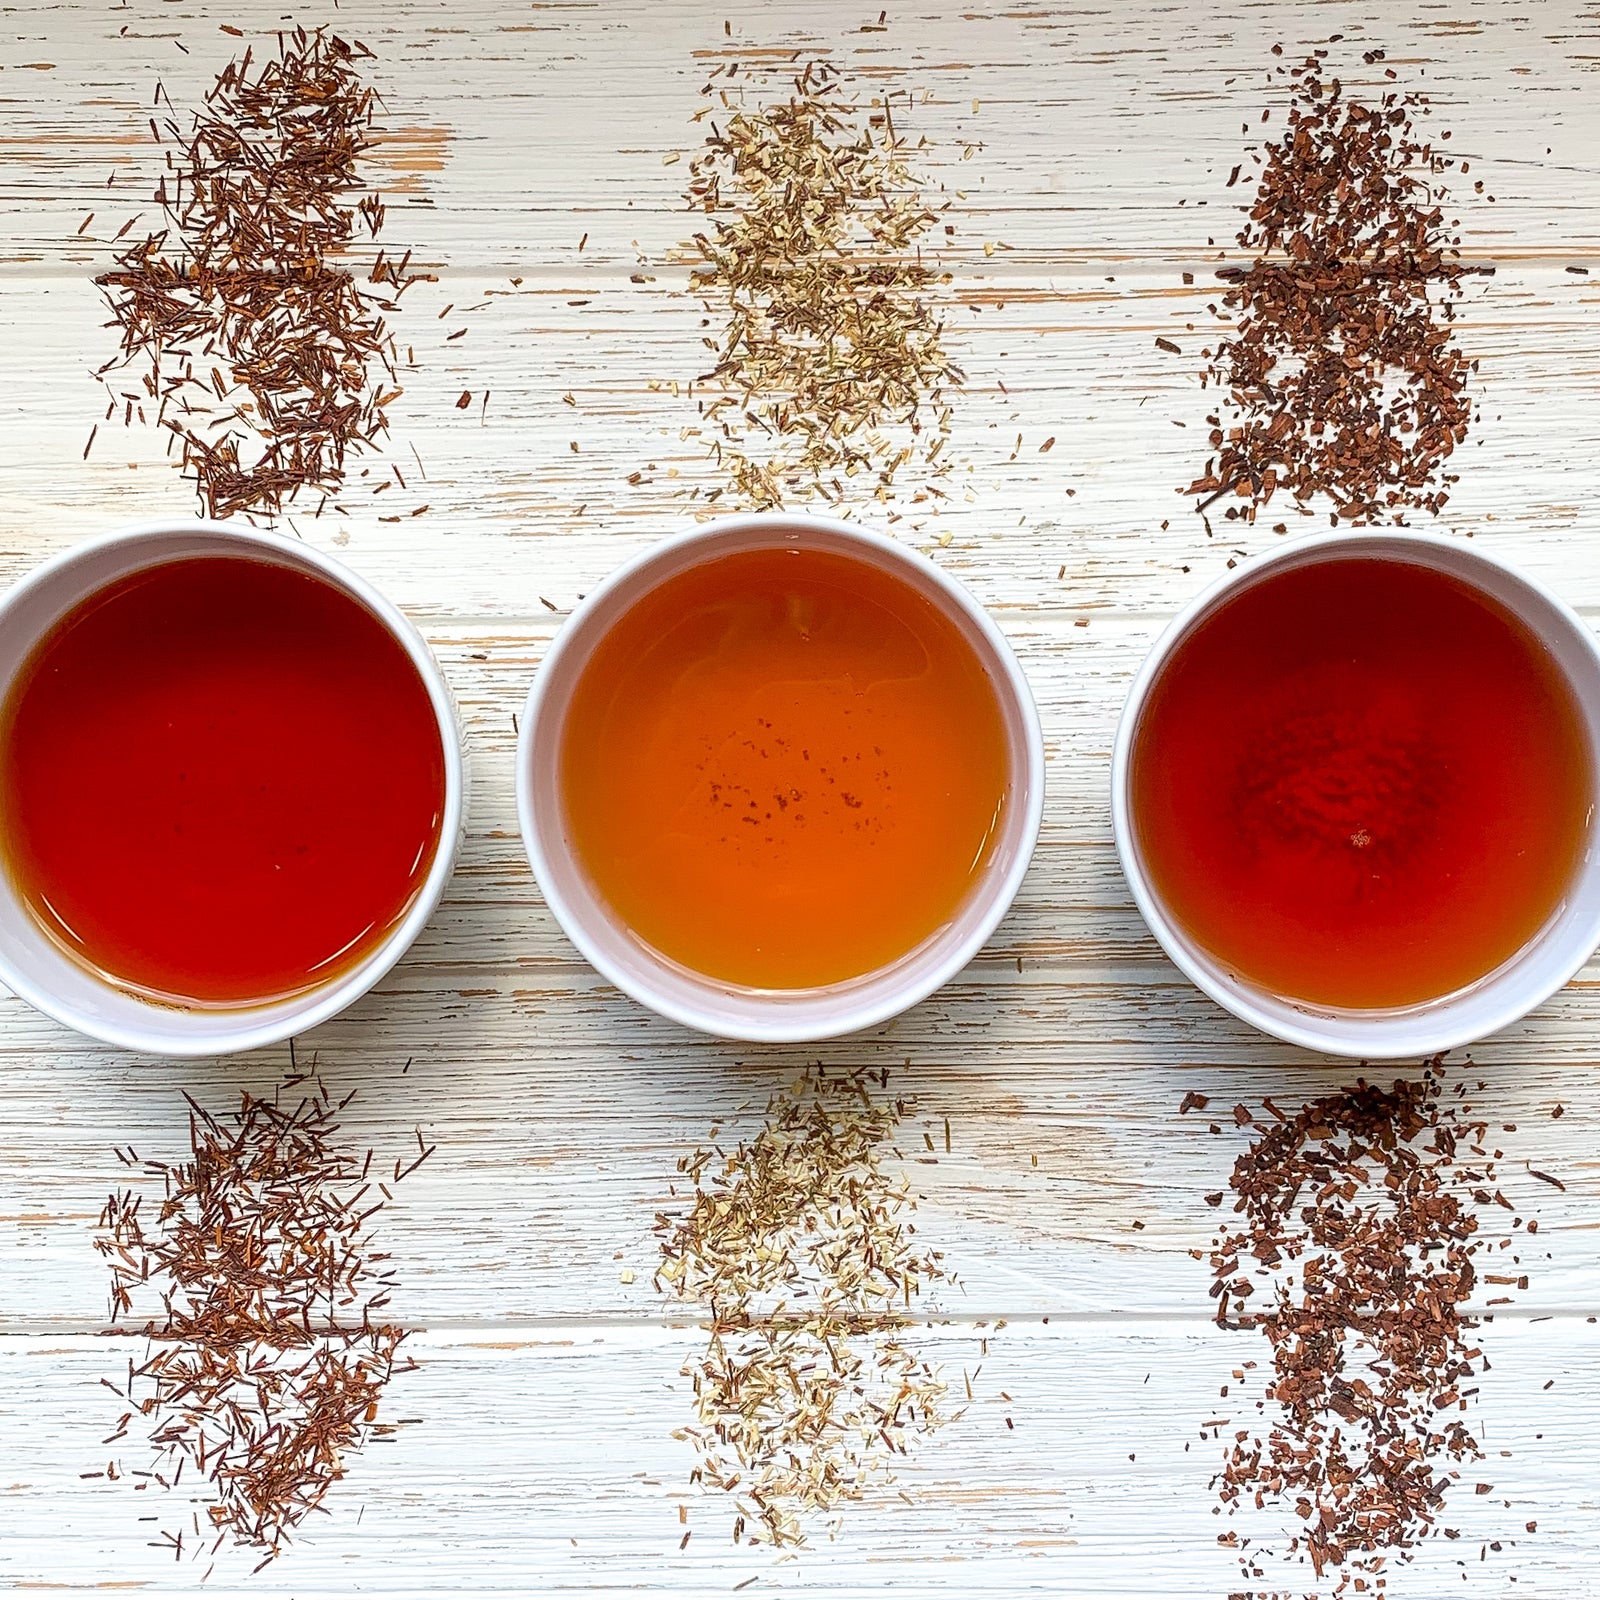 All about Rooibos and Honeybush